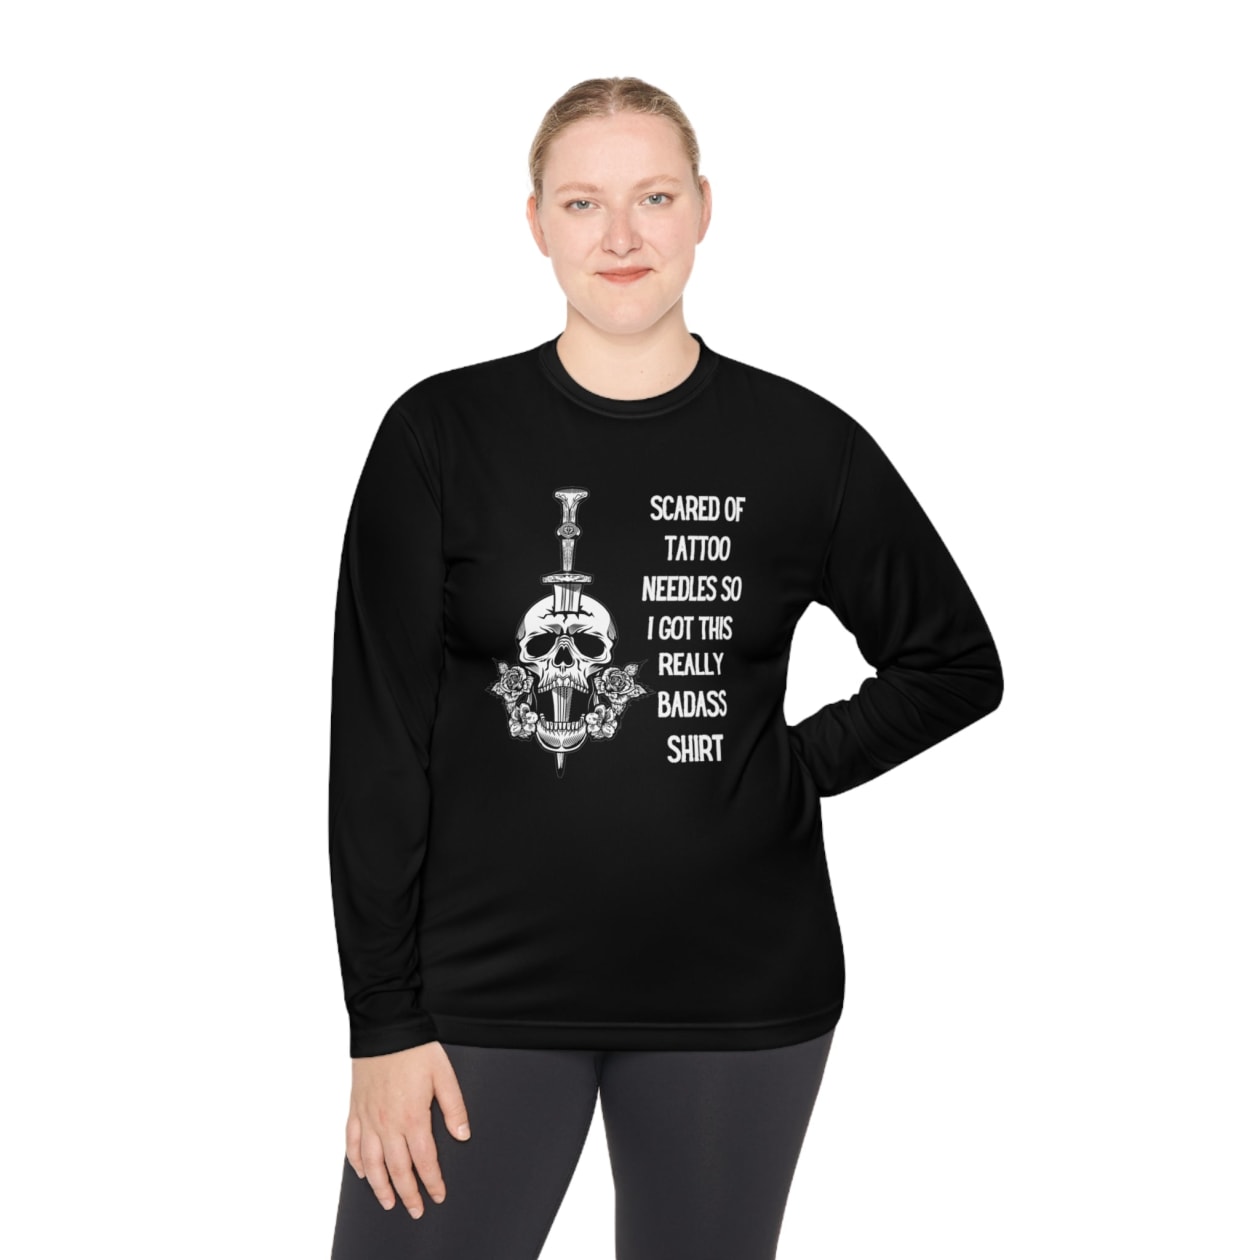 Scared of Tattoo Needles So I Got This Really Badass Shirt Unisex Lightweight Long Sleeve Tee (Sizes through 4X) - Color: Black, Size: XS